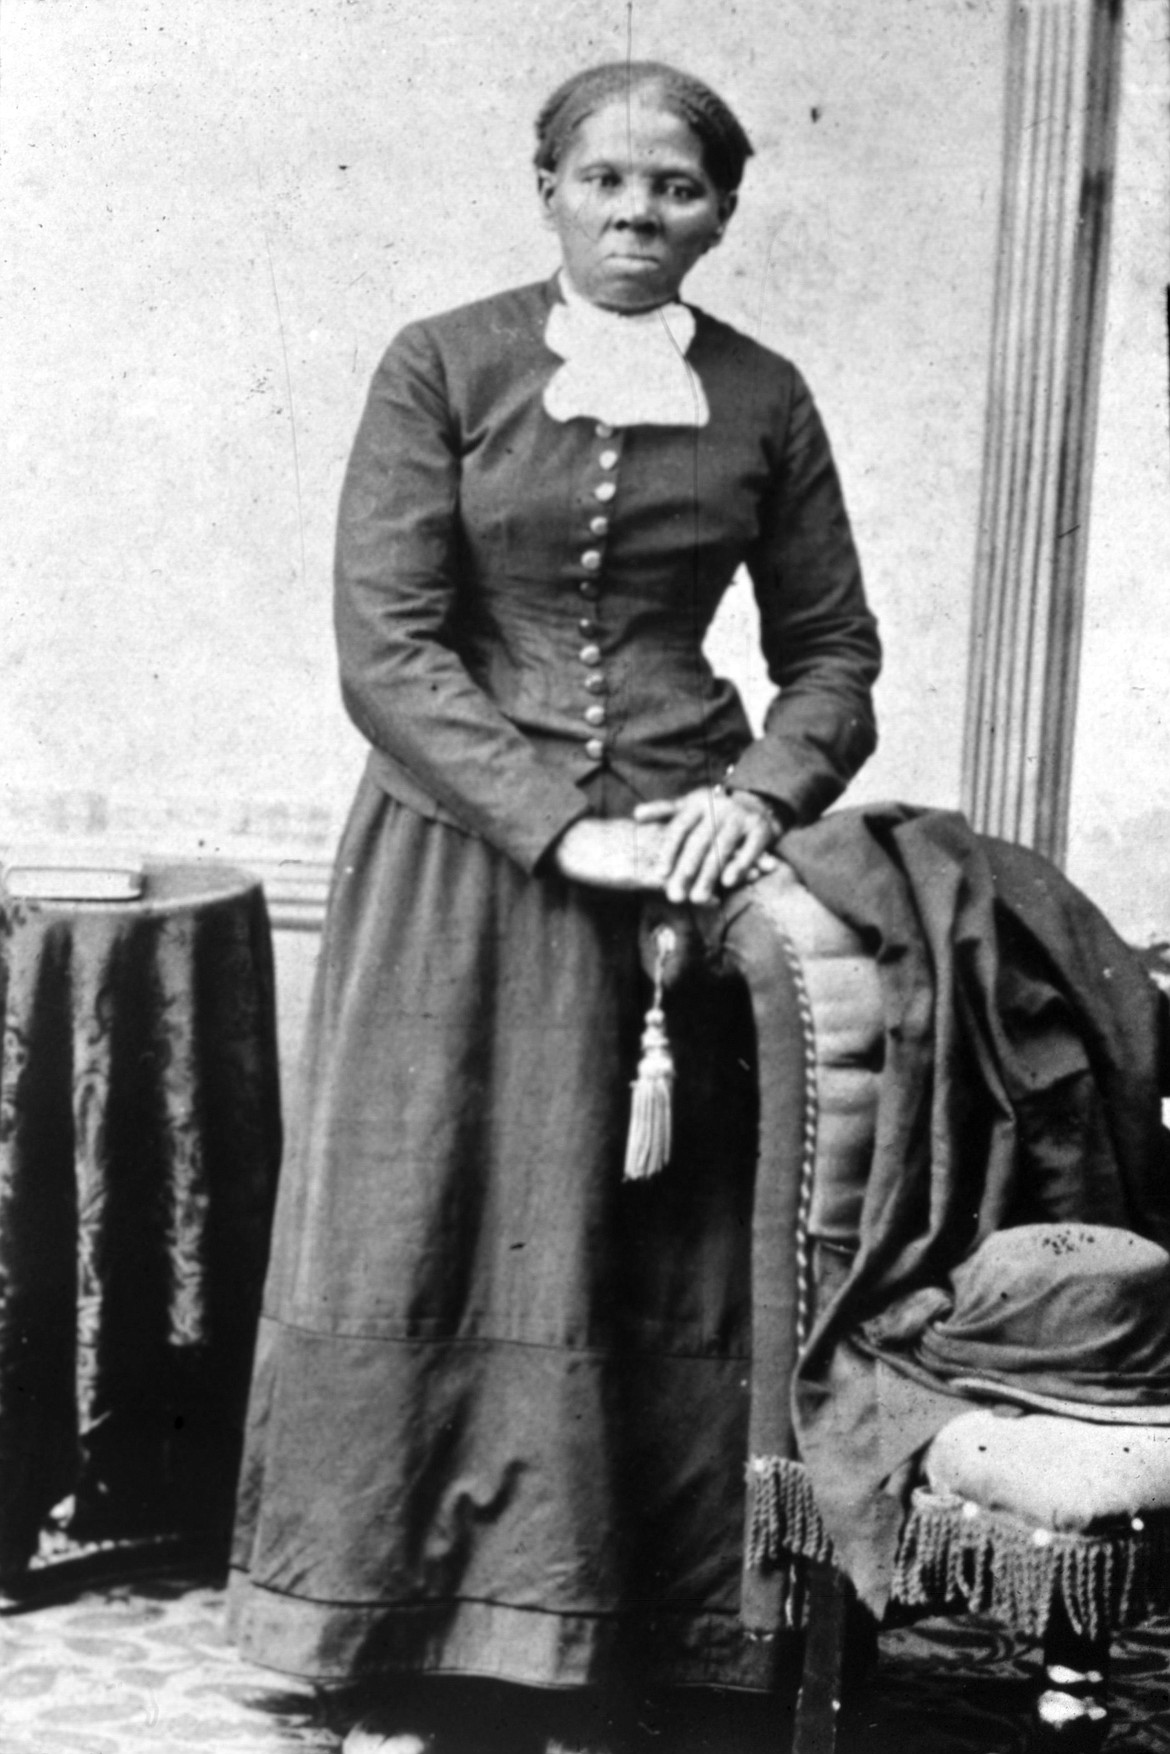 Harriet Tubman Davis (1820-1913) iconic abolitionist who personally rescued 70 slaves in Southern states and led them to freedom through secret routes to the North known as the “Underground Railway.”